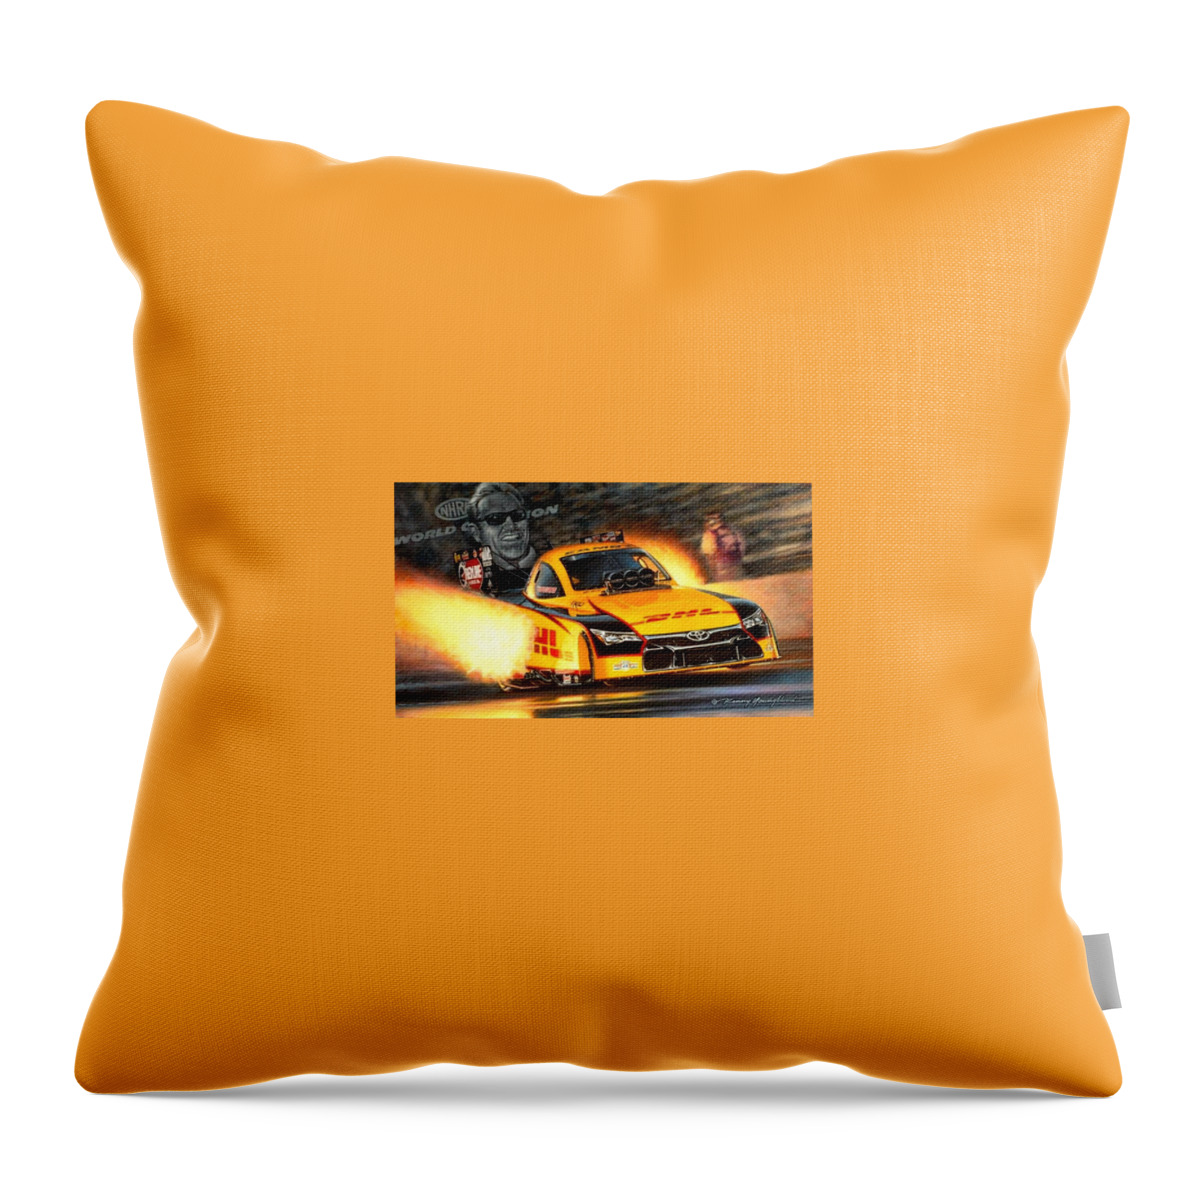 Nhra Drag Racing Top Fuel Funny Car Kenny Youngblood Tom Mcewen Mongoose John Force Del Worsham Throw Pillow featuring the painting Championship Delivery by Kenny Youngblood